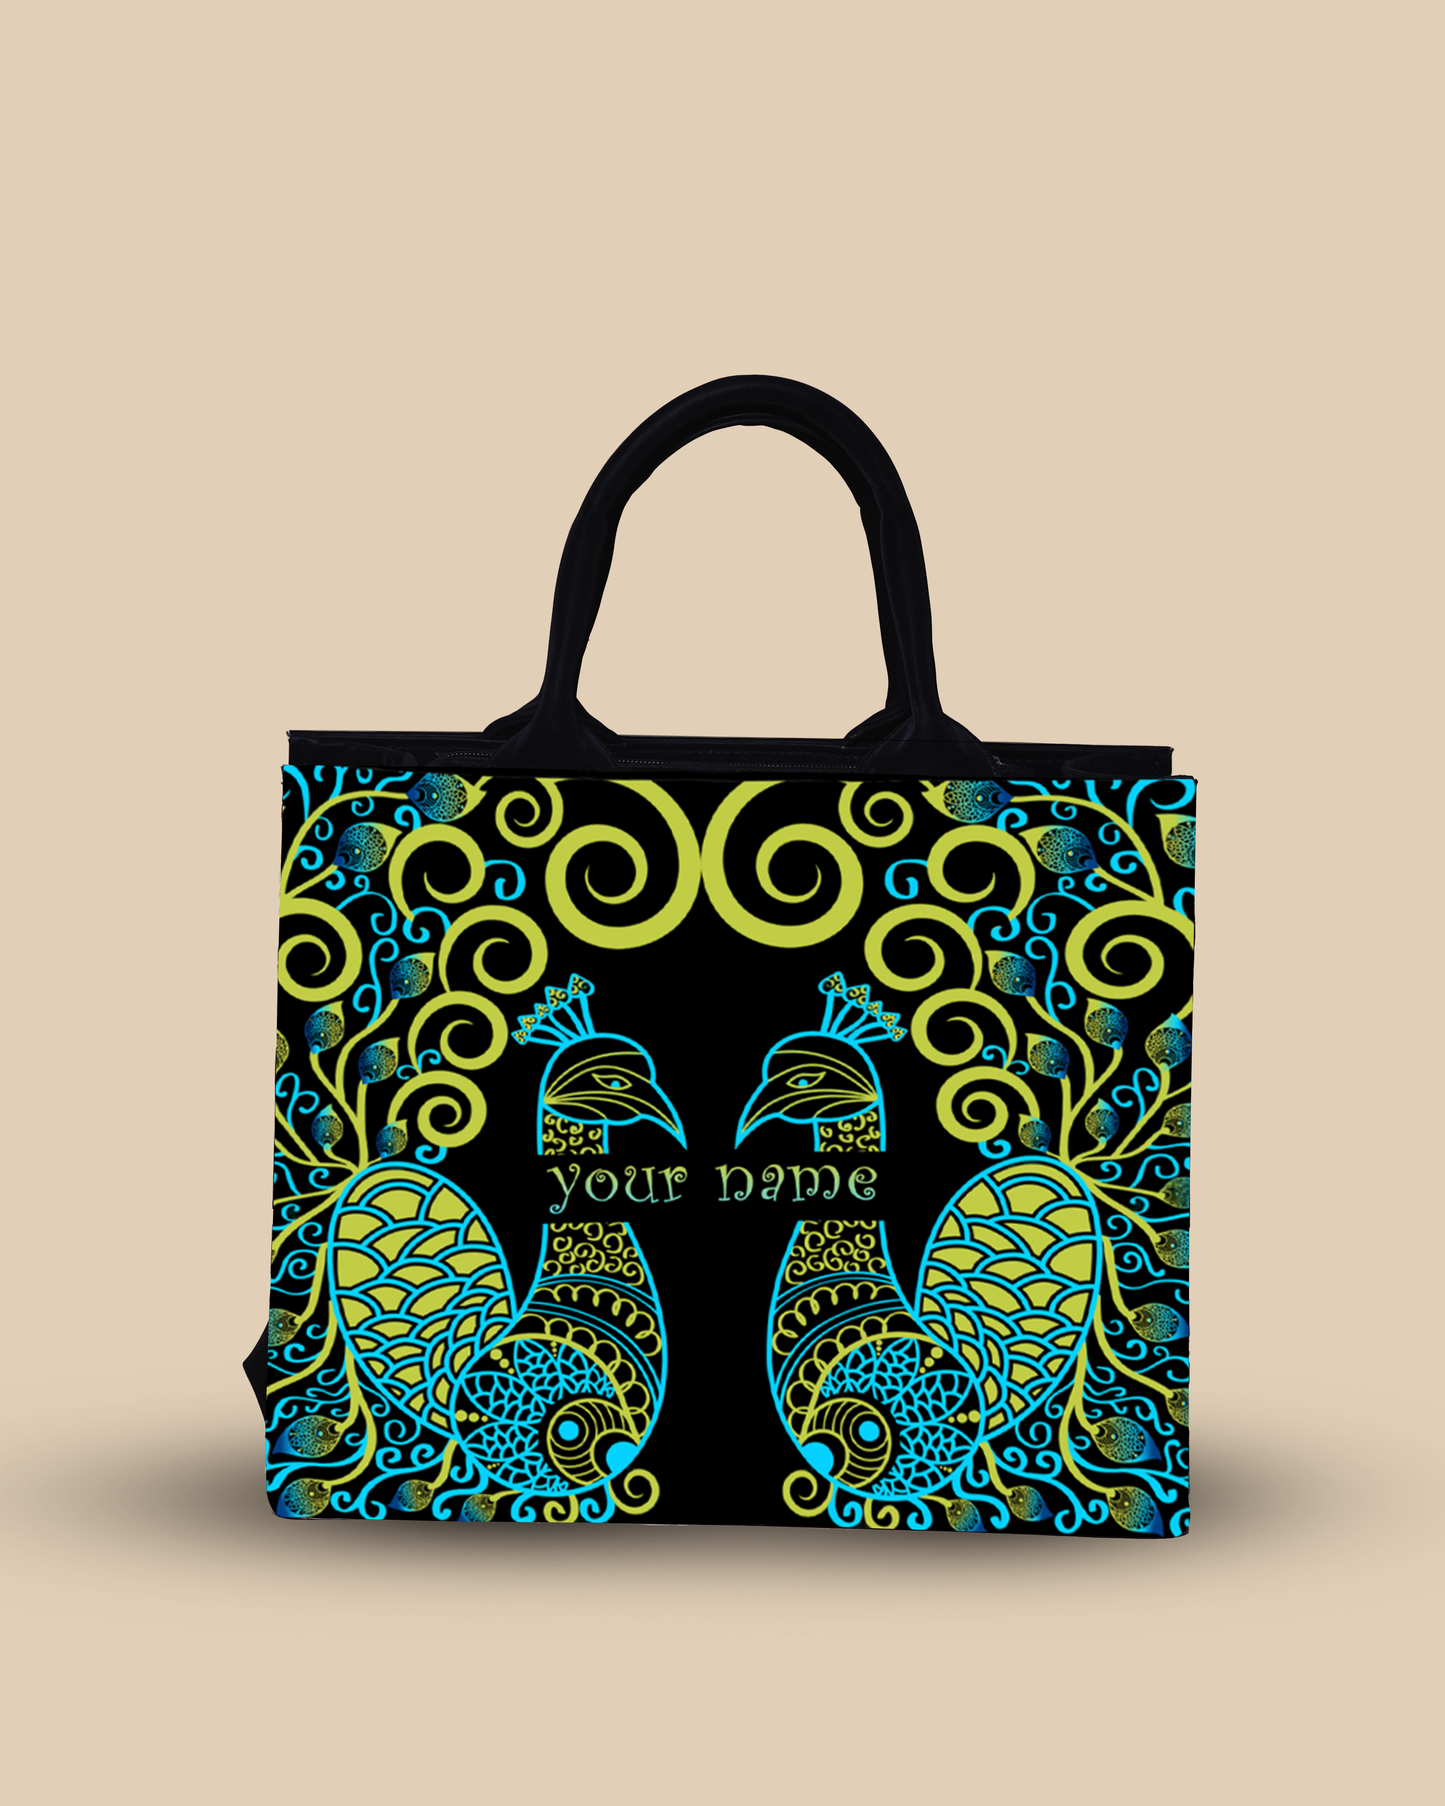 Customized small Tote Bag Designed with Emboss Colorful Peacocks